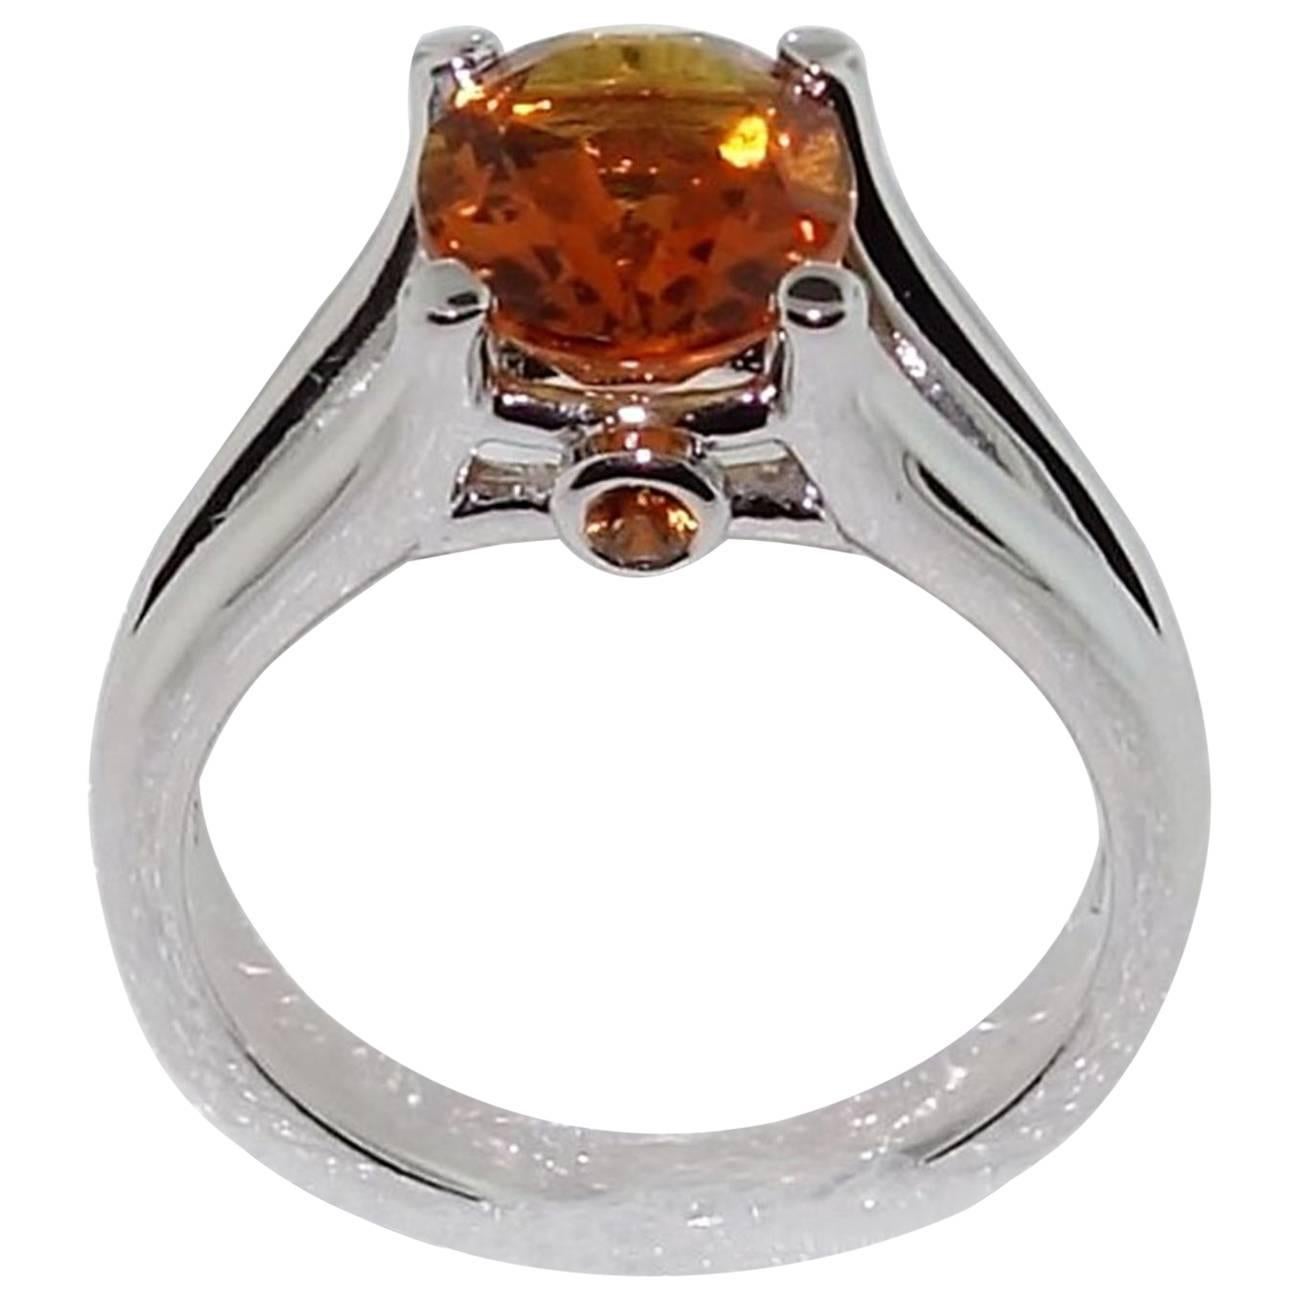 2.24 Carat Citrine Sapphire Sterling Silver Ring